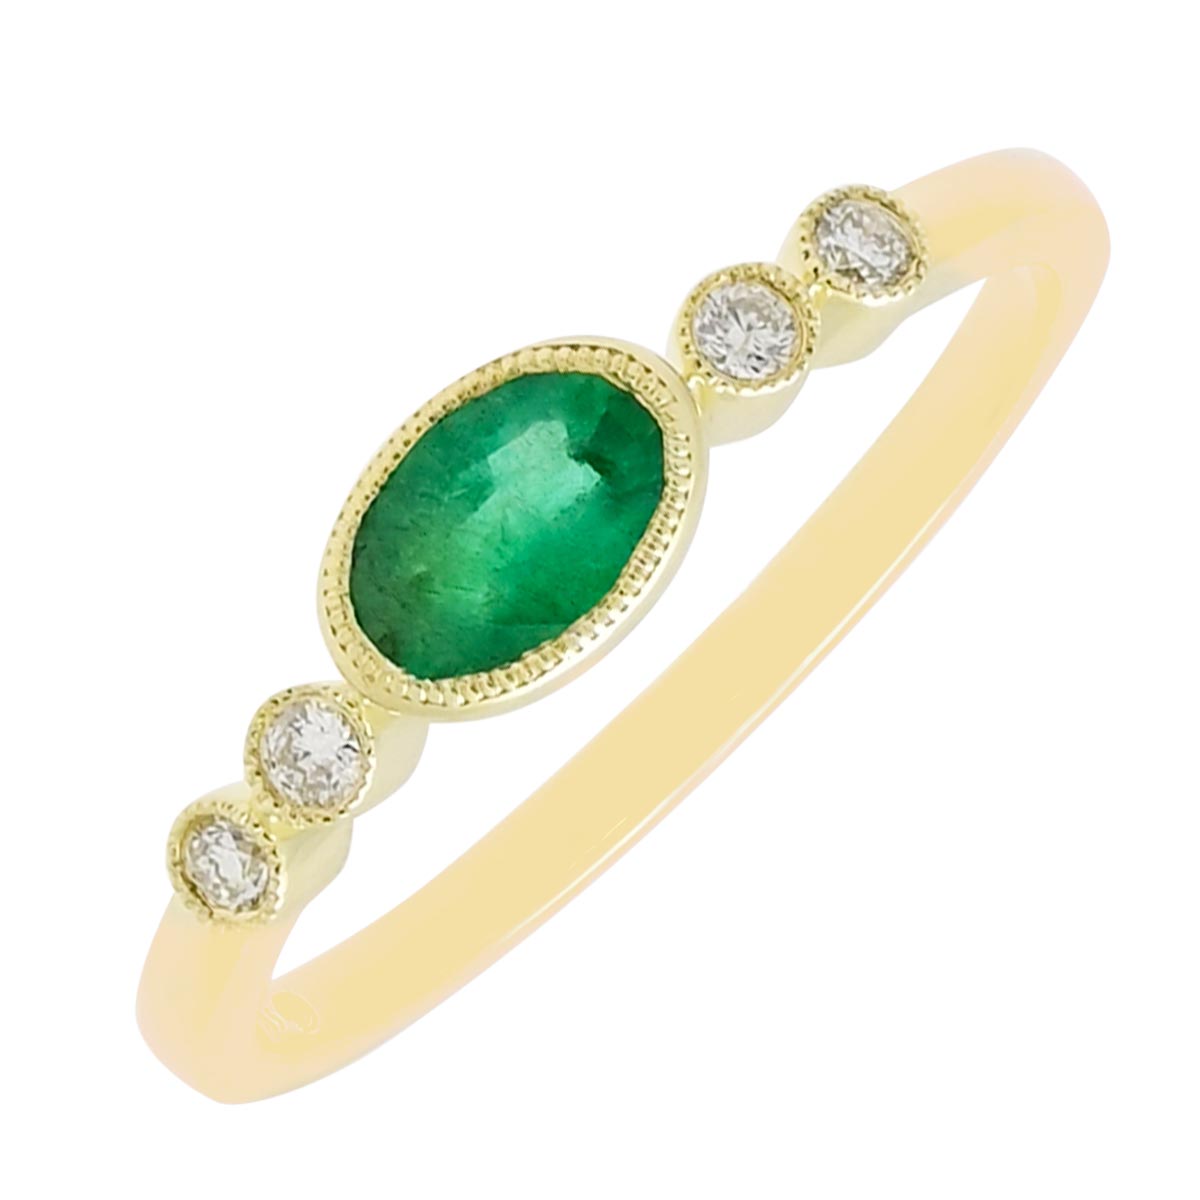 Dabakarov Oval Emerald Bezel Ring in 14kt Yellow Gold with Diamonds (1/10ct tw)